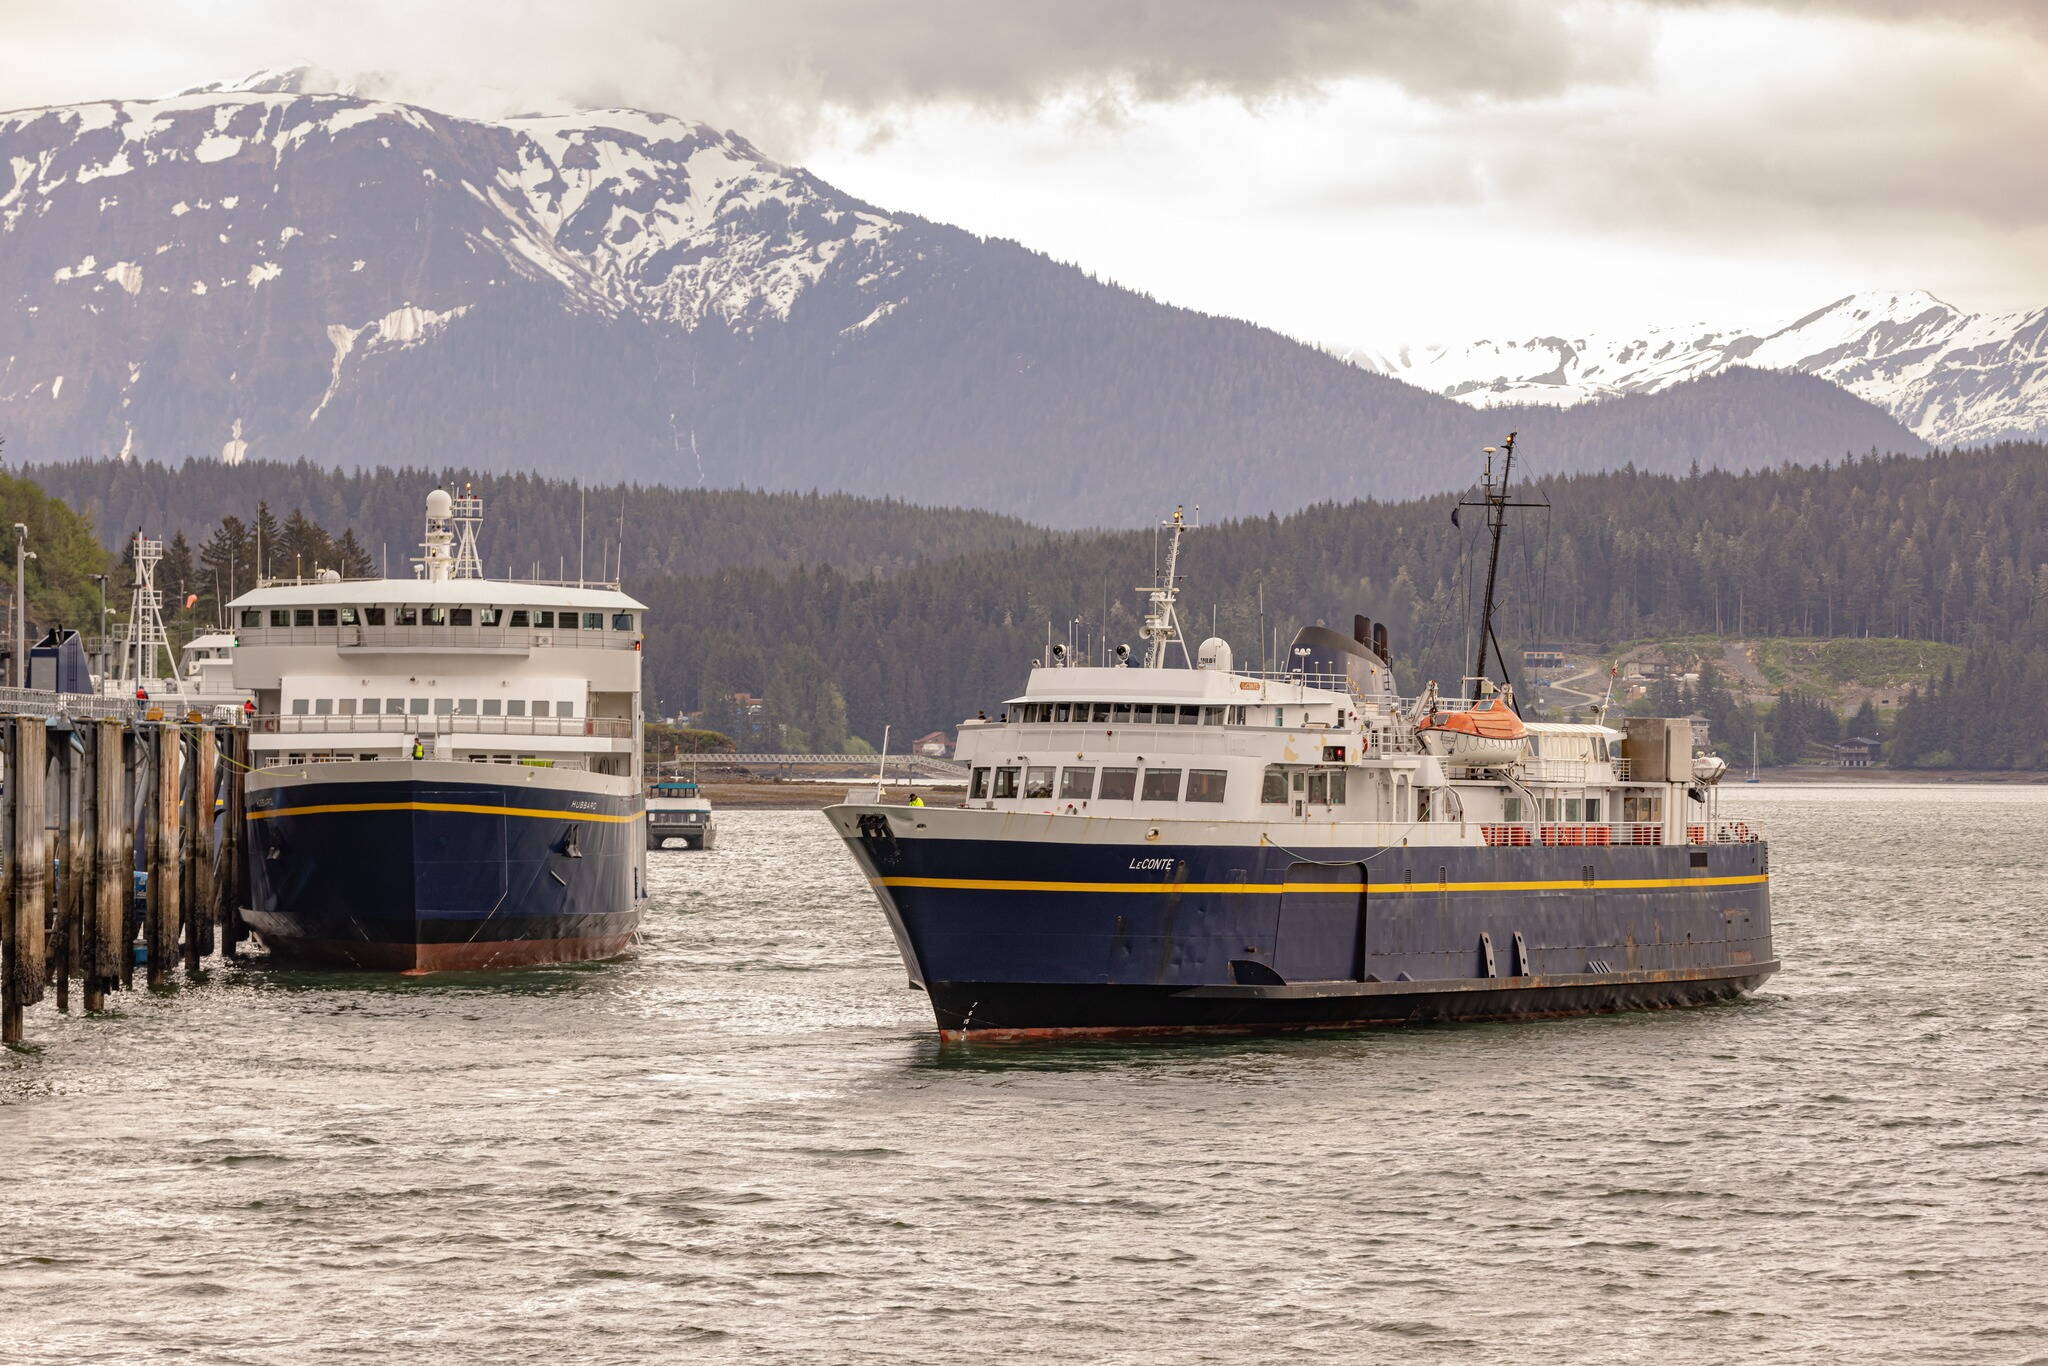 The Hubbard state ferry (left), the newest vessel in the Alaska Marine Highway System fleet, is back in service in northern Southeast Alaska after a maintenance period as the LeConte, which also serves the region, undergoes a scheduled annual overhaul until March 3. (Photo courtesy of the Alaska Marine Highway System)